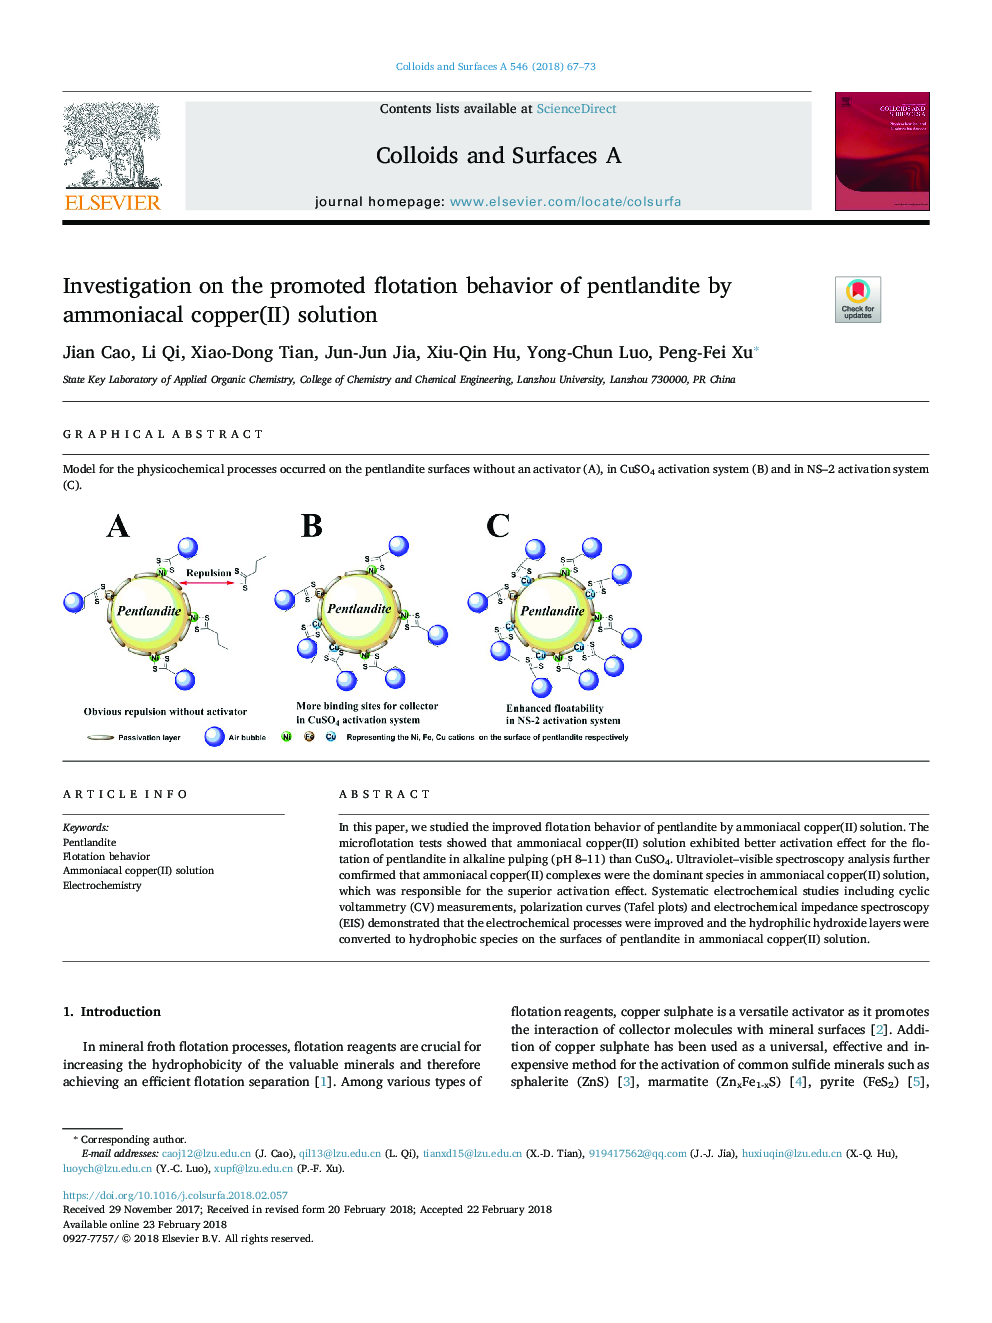 Investigation on the promoted flotation behavior of pentlandite by ammoniacal copper(II) solution